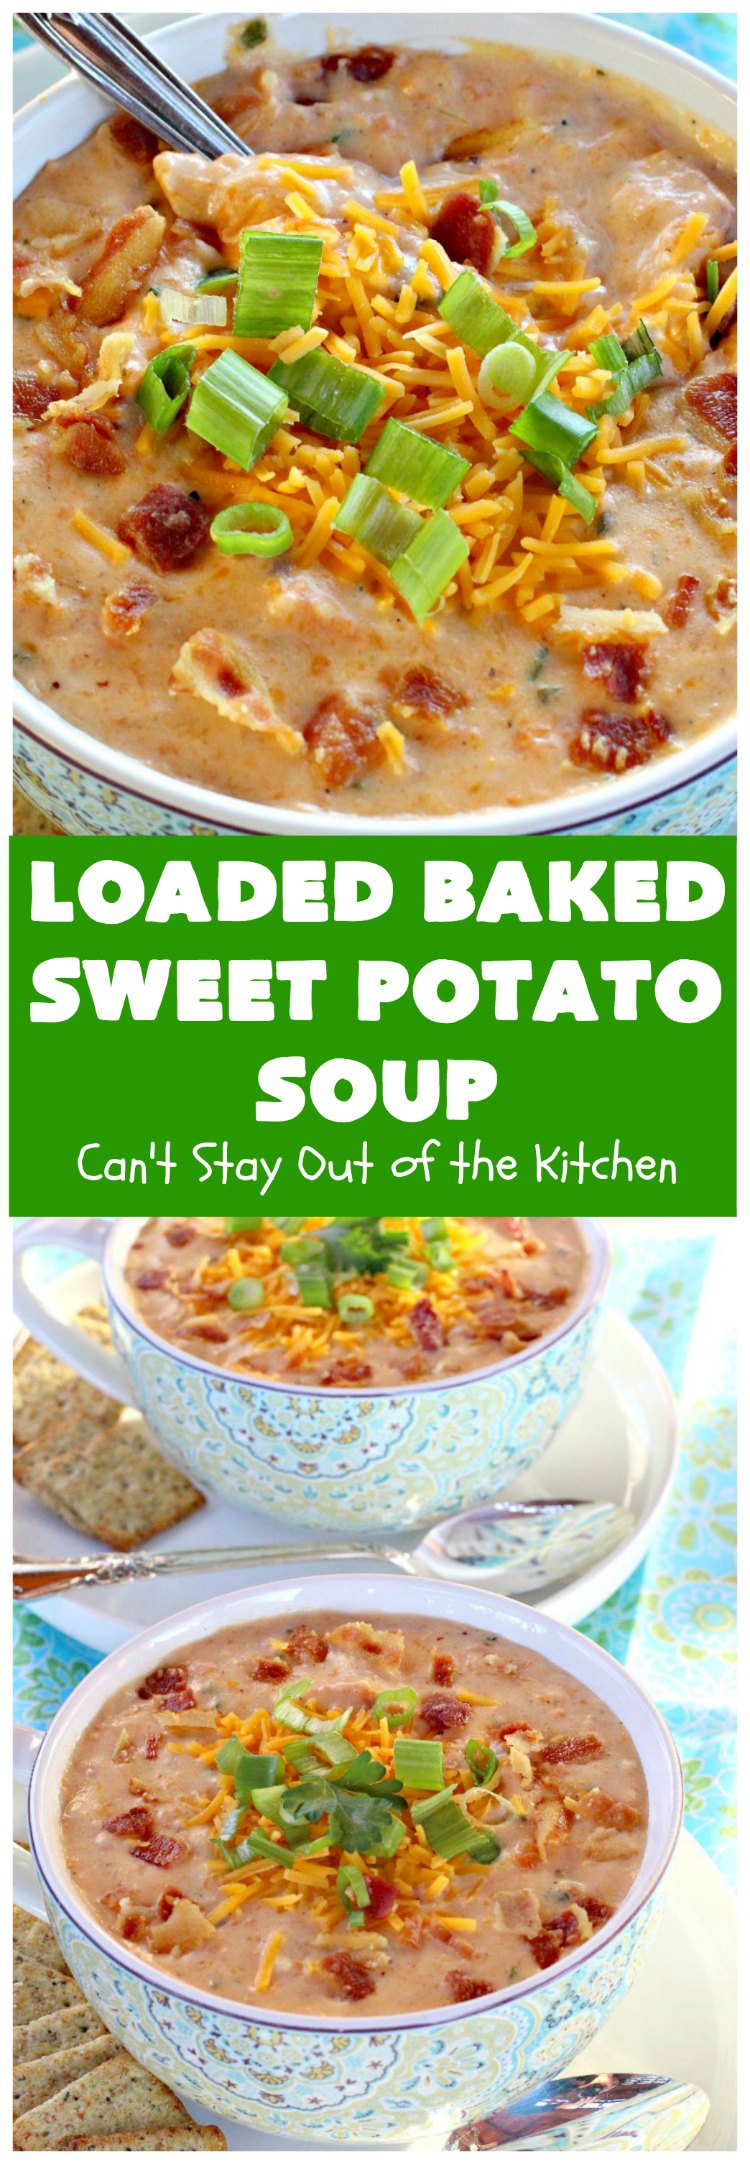 Loaded Baked Sweet Potato Soup | Can't Stay Out of the Kitchen